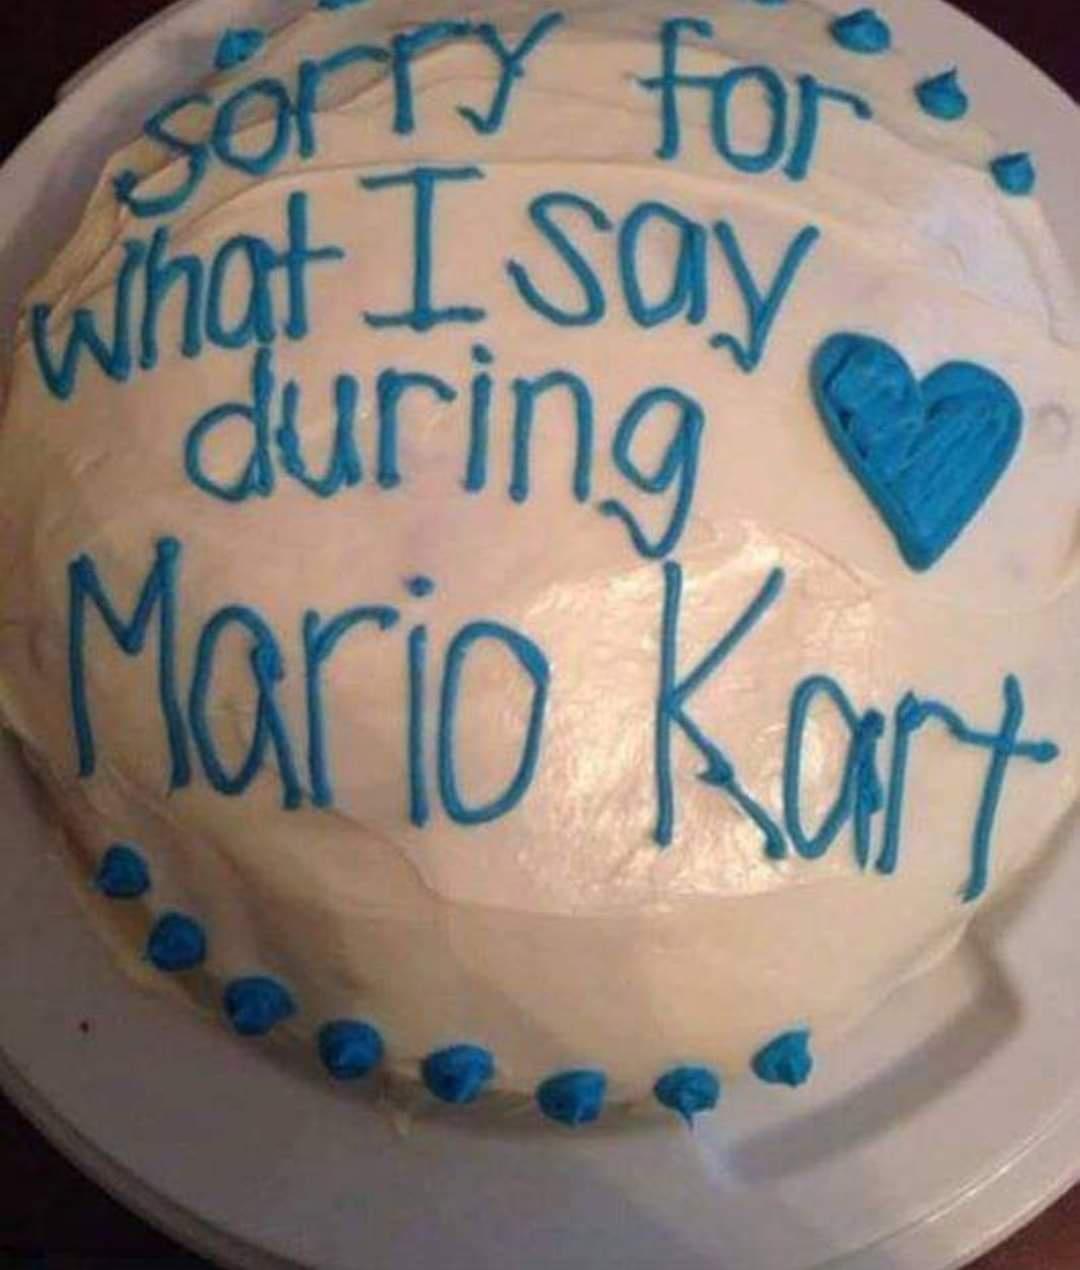 funny gaming memes - buttercream - son foi what I say during Mario Kart